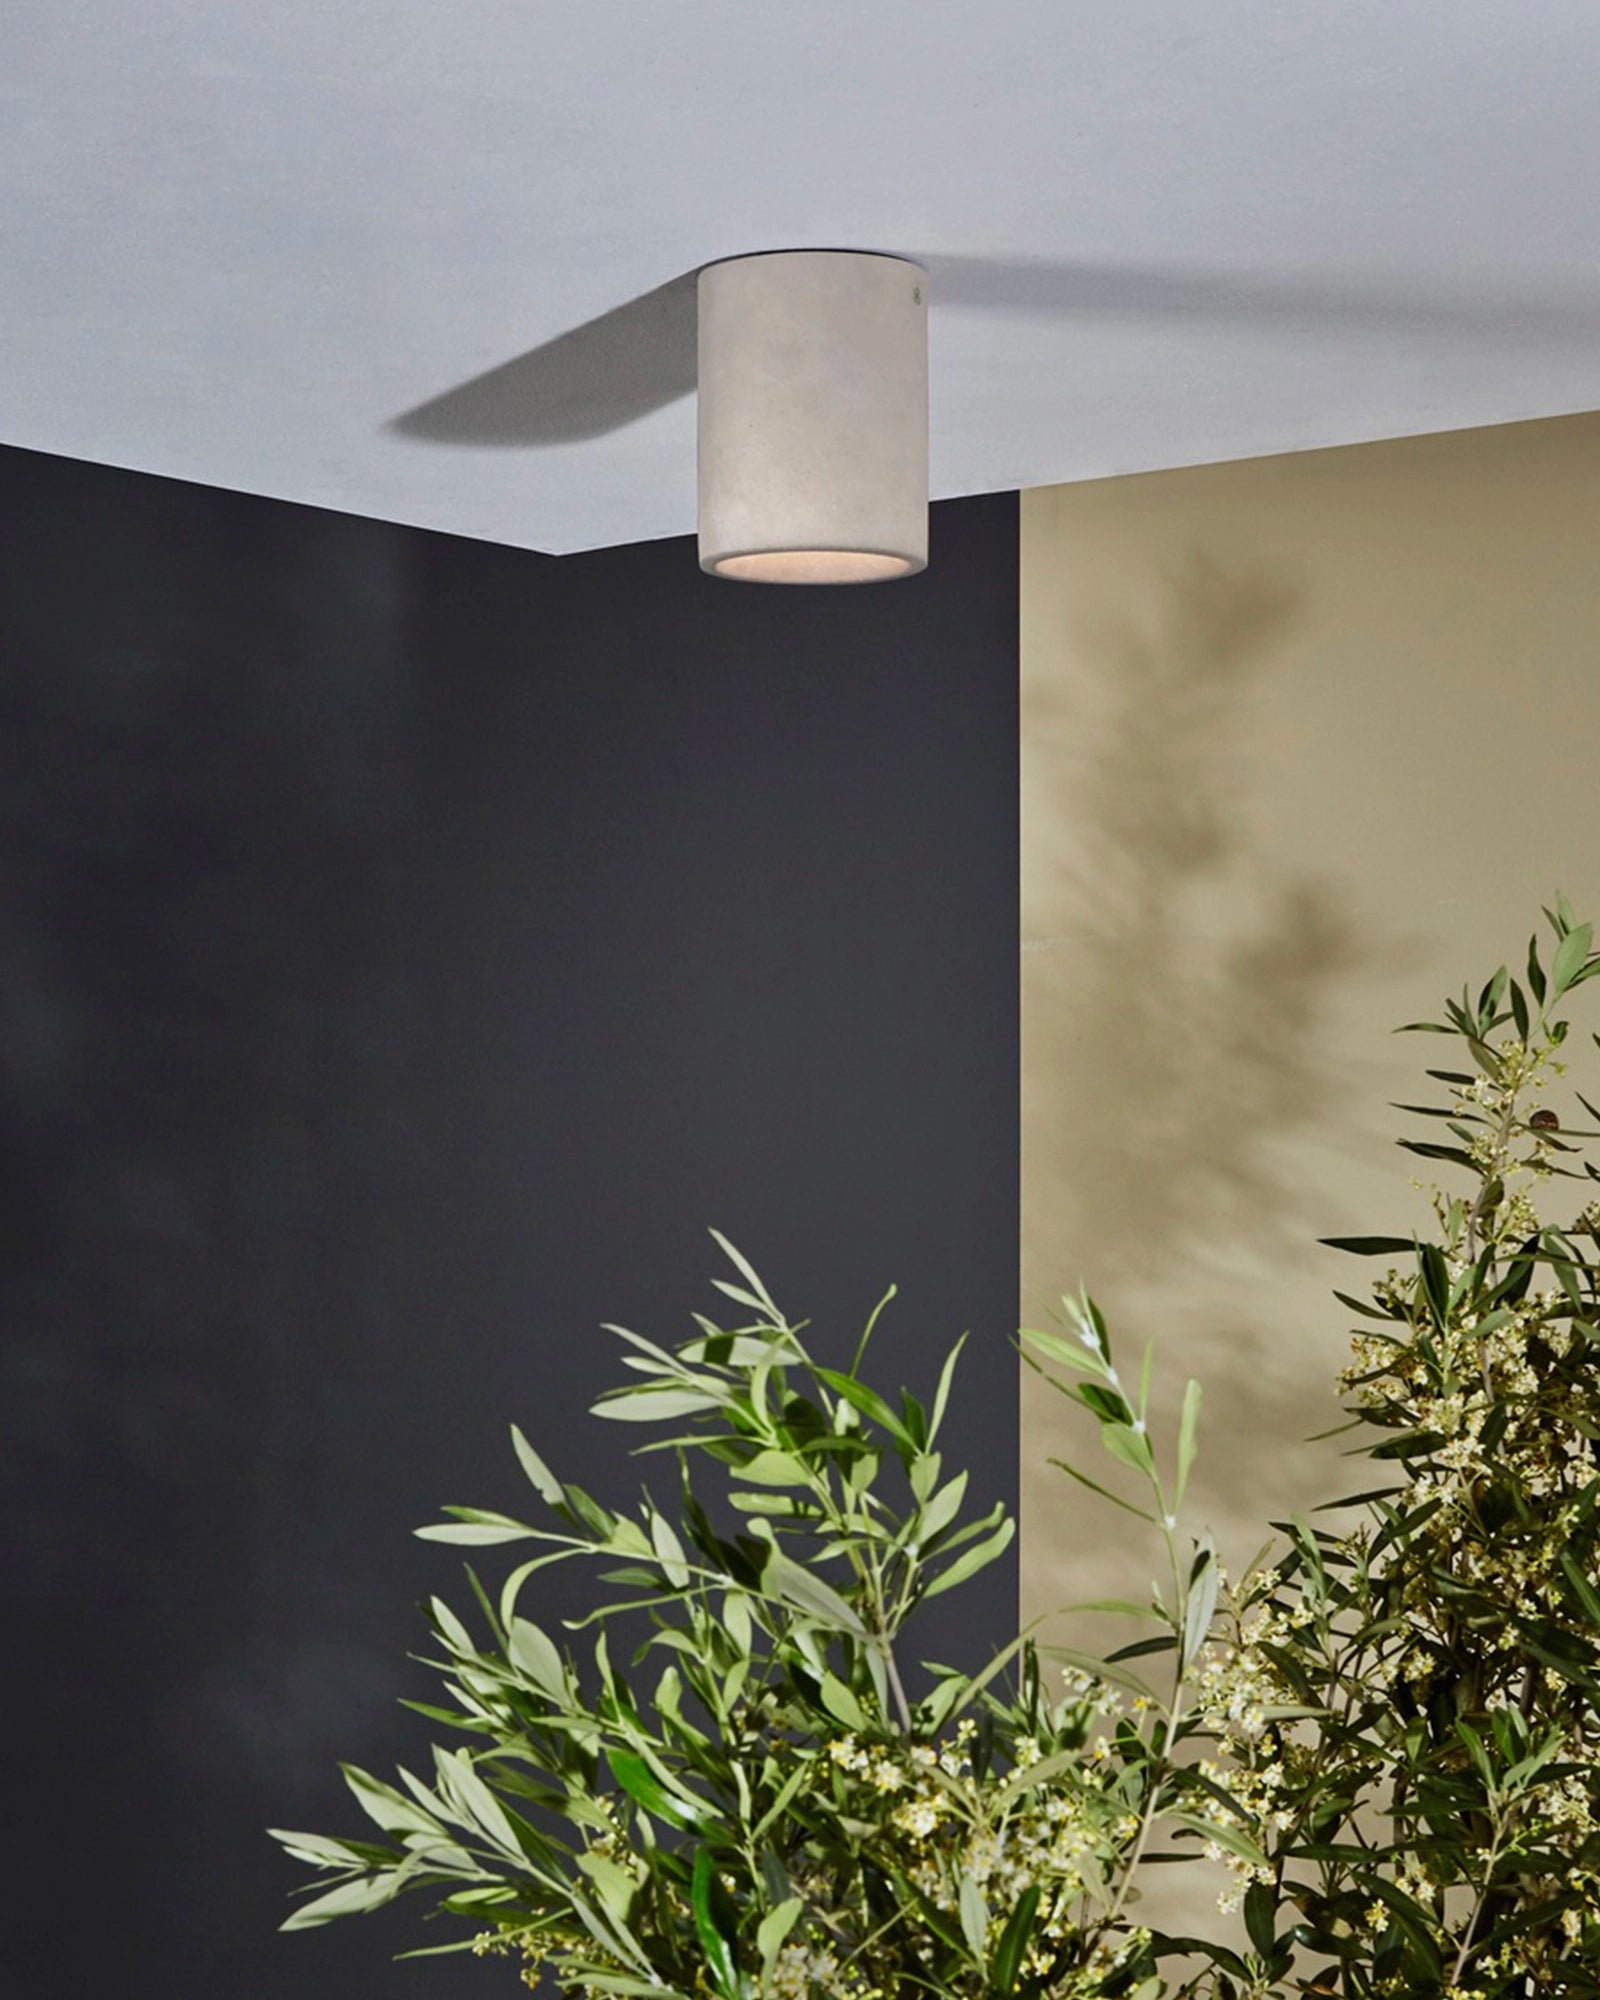 Kos Concrete Downlight by Astro Lighting at Nook Collections